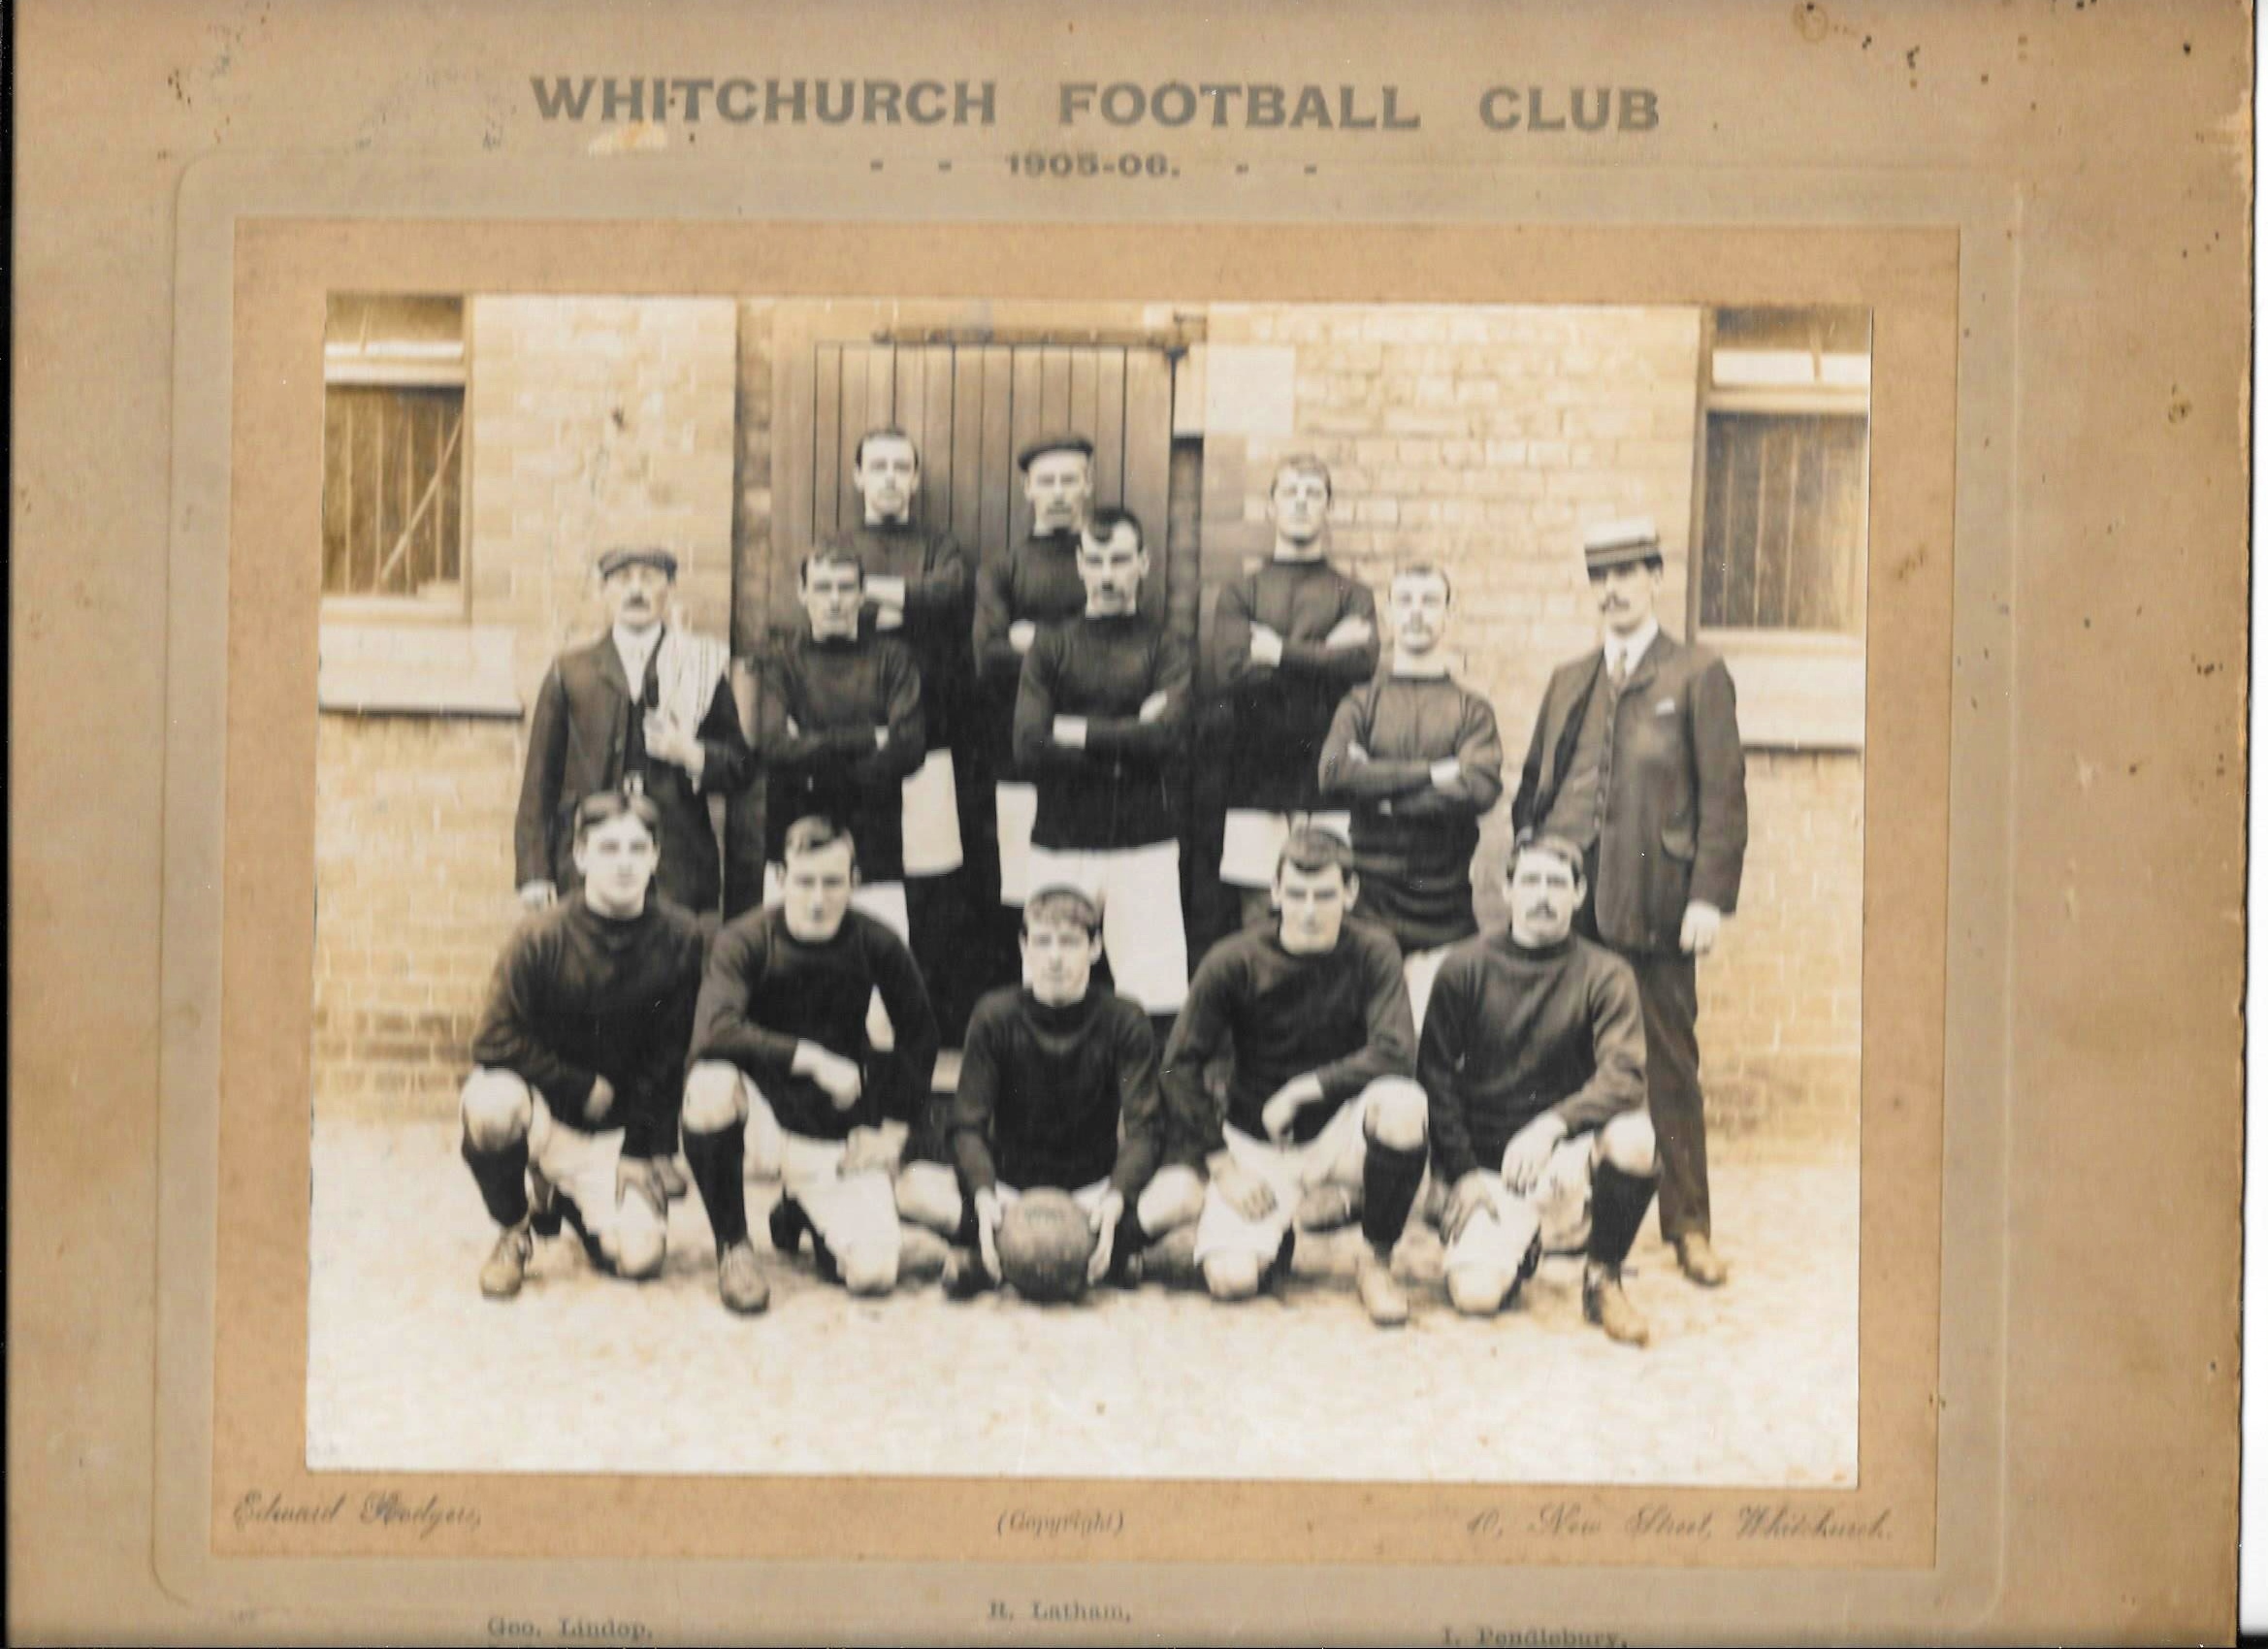 Whitchurch Town - an ancestor of the current club.